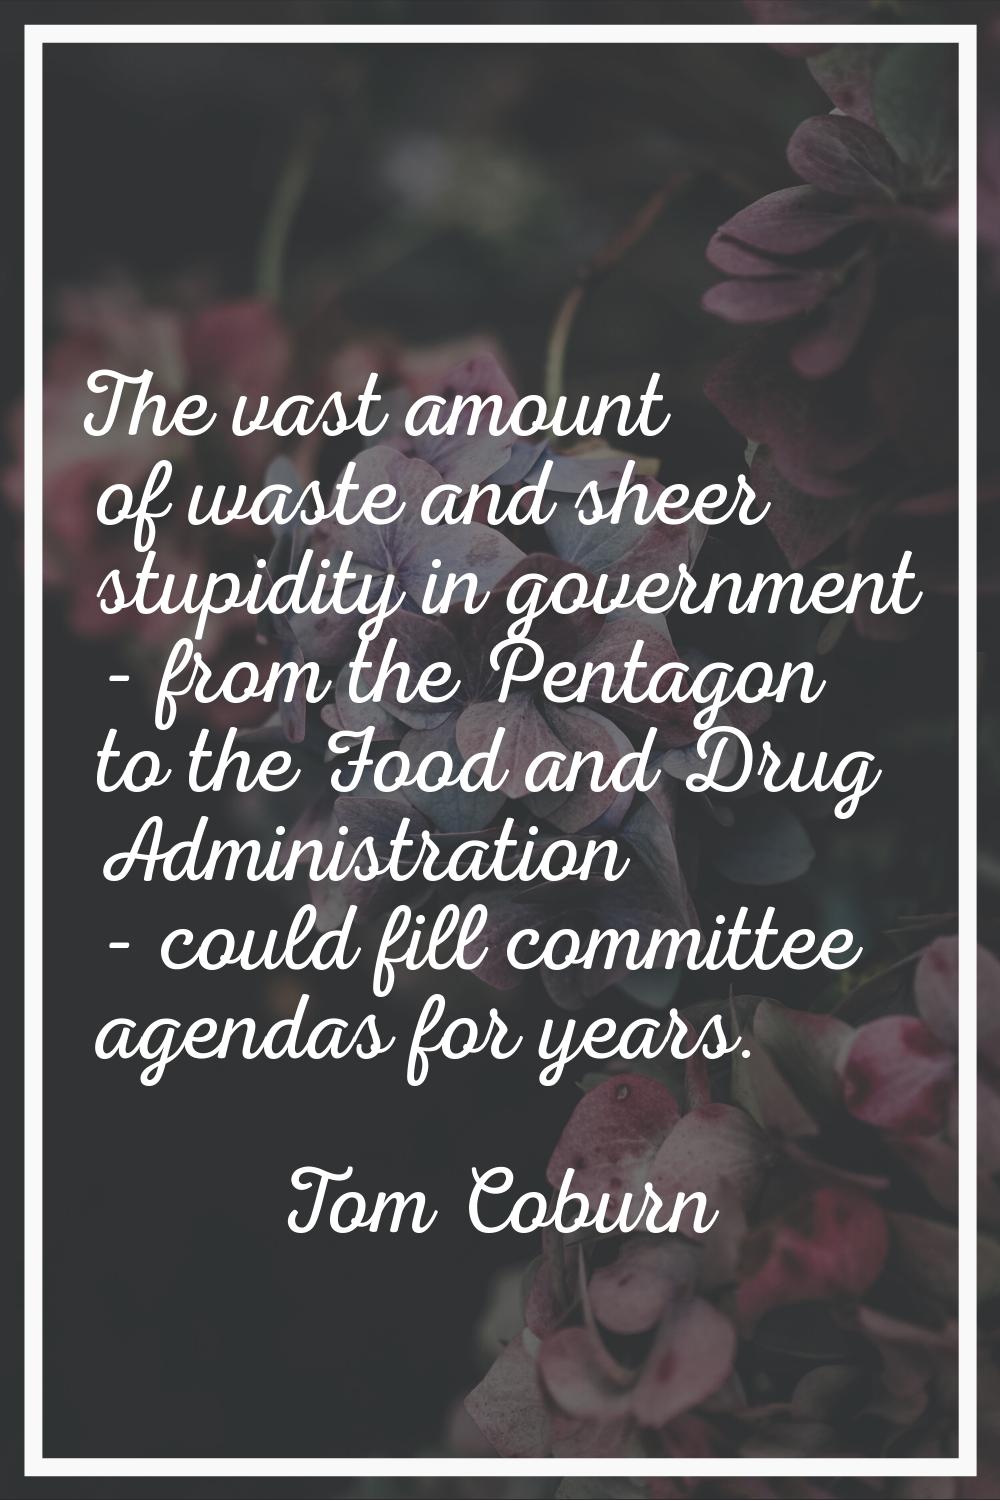 The vast amount of waste and sheer stupidity in government - from the Pentagon to the Food and Drug